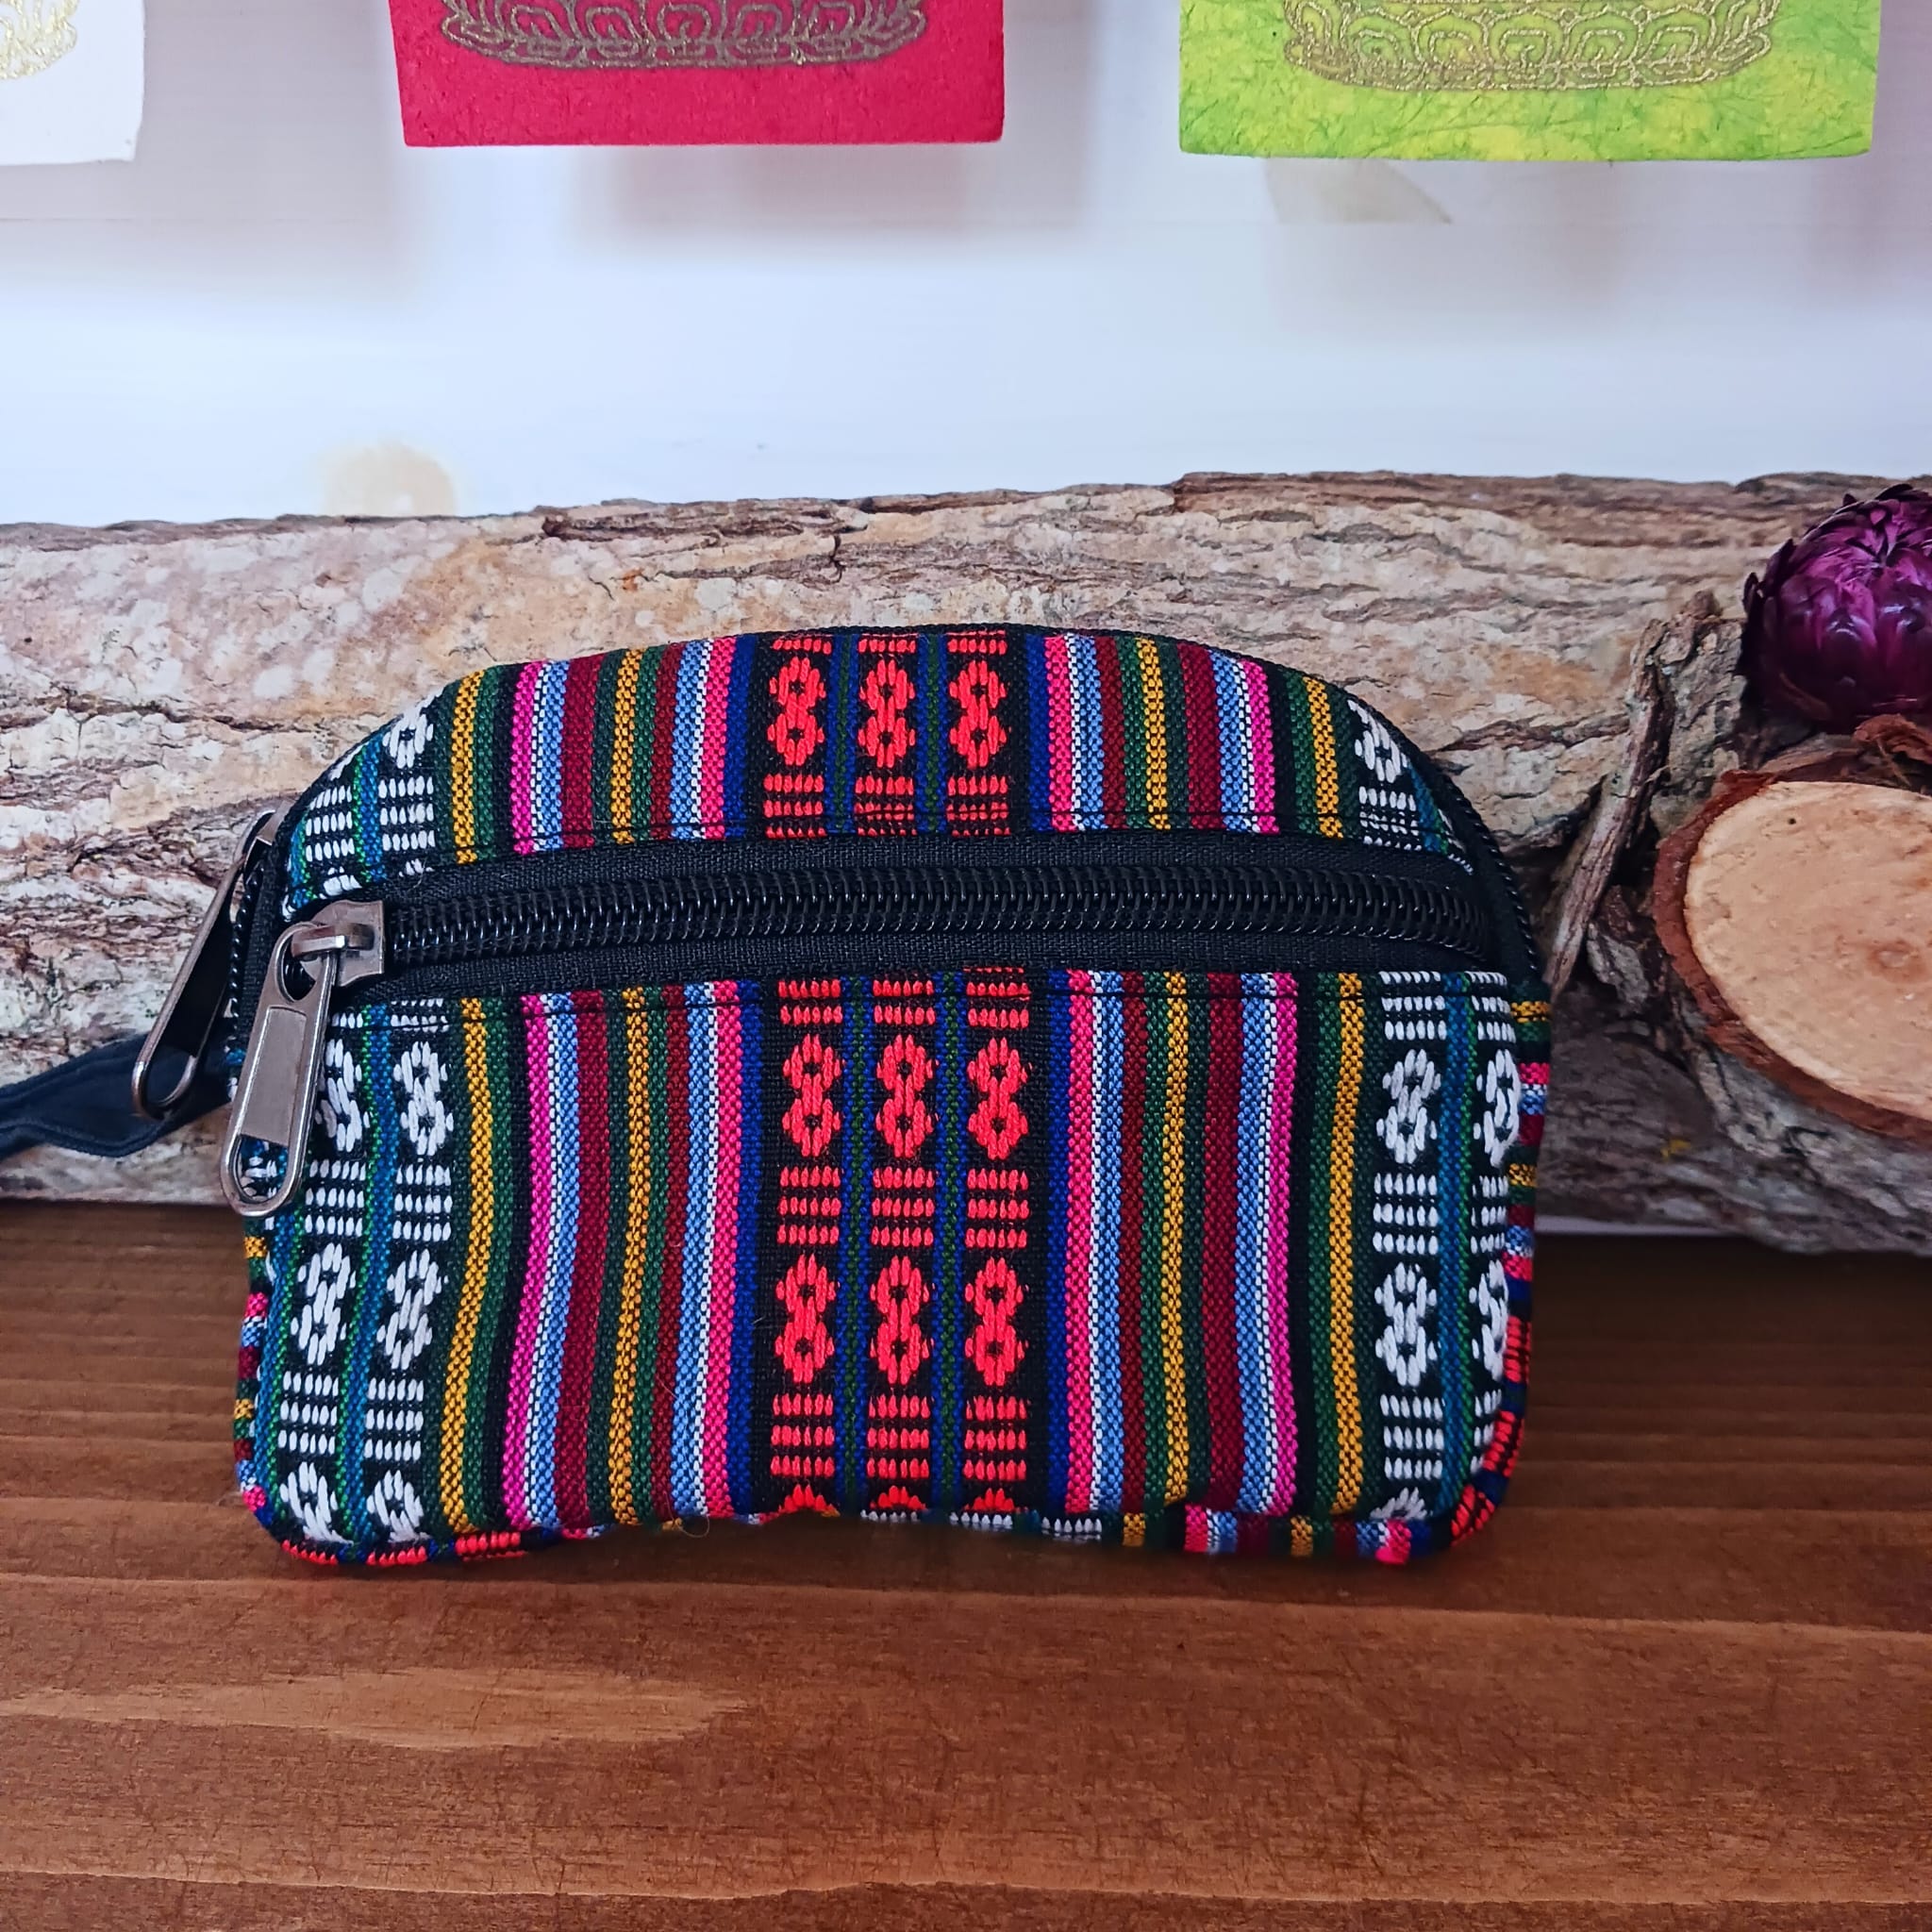 Colorful Tibetan Designs On Wall And Tote Bag by Gallo Images - Photos.com